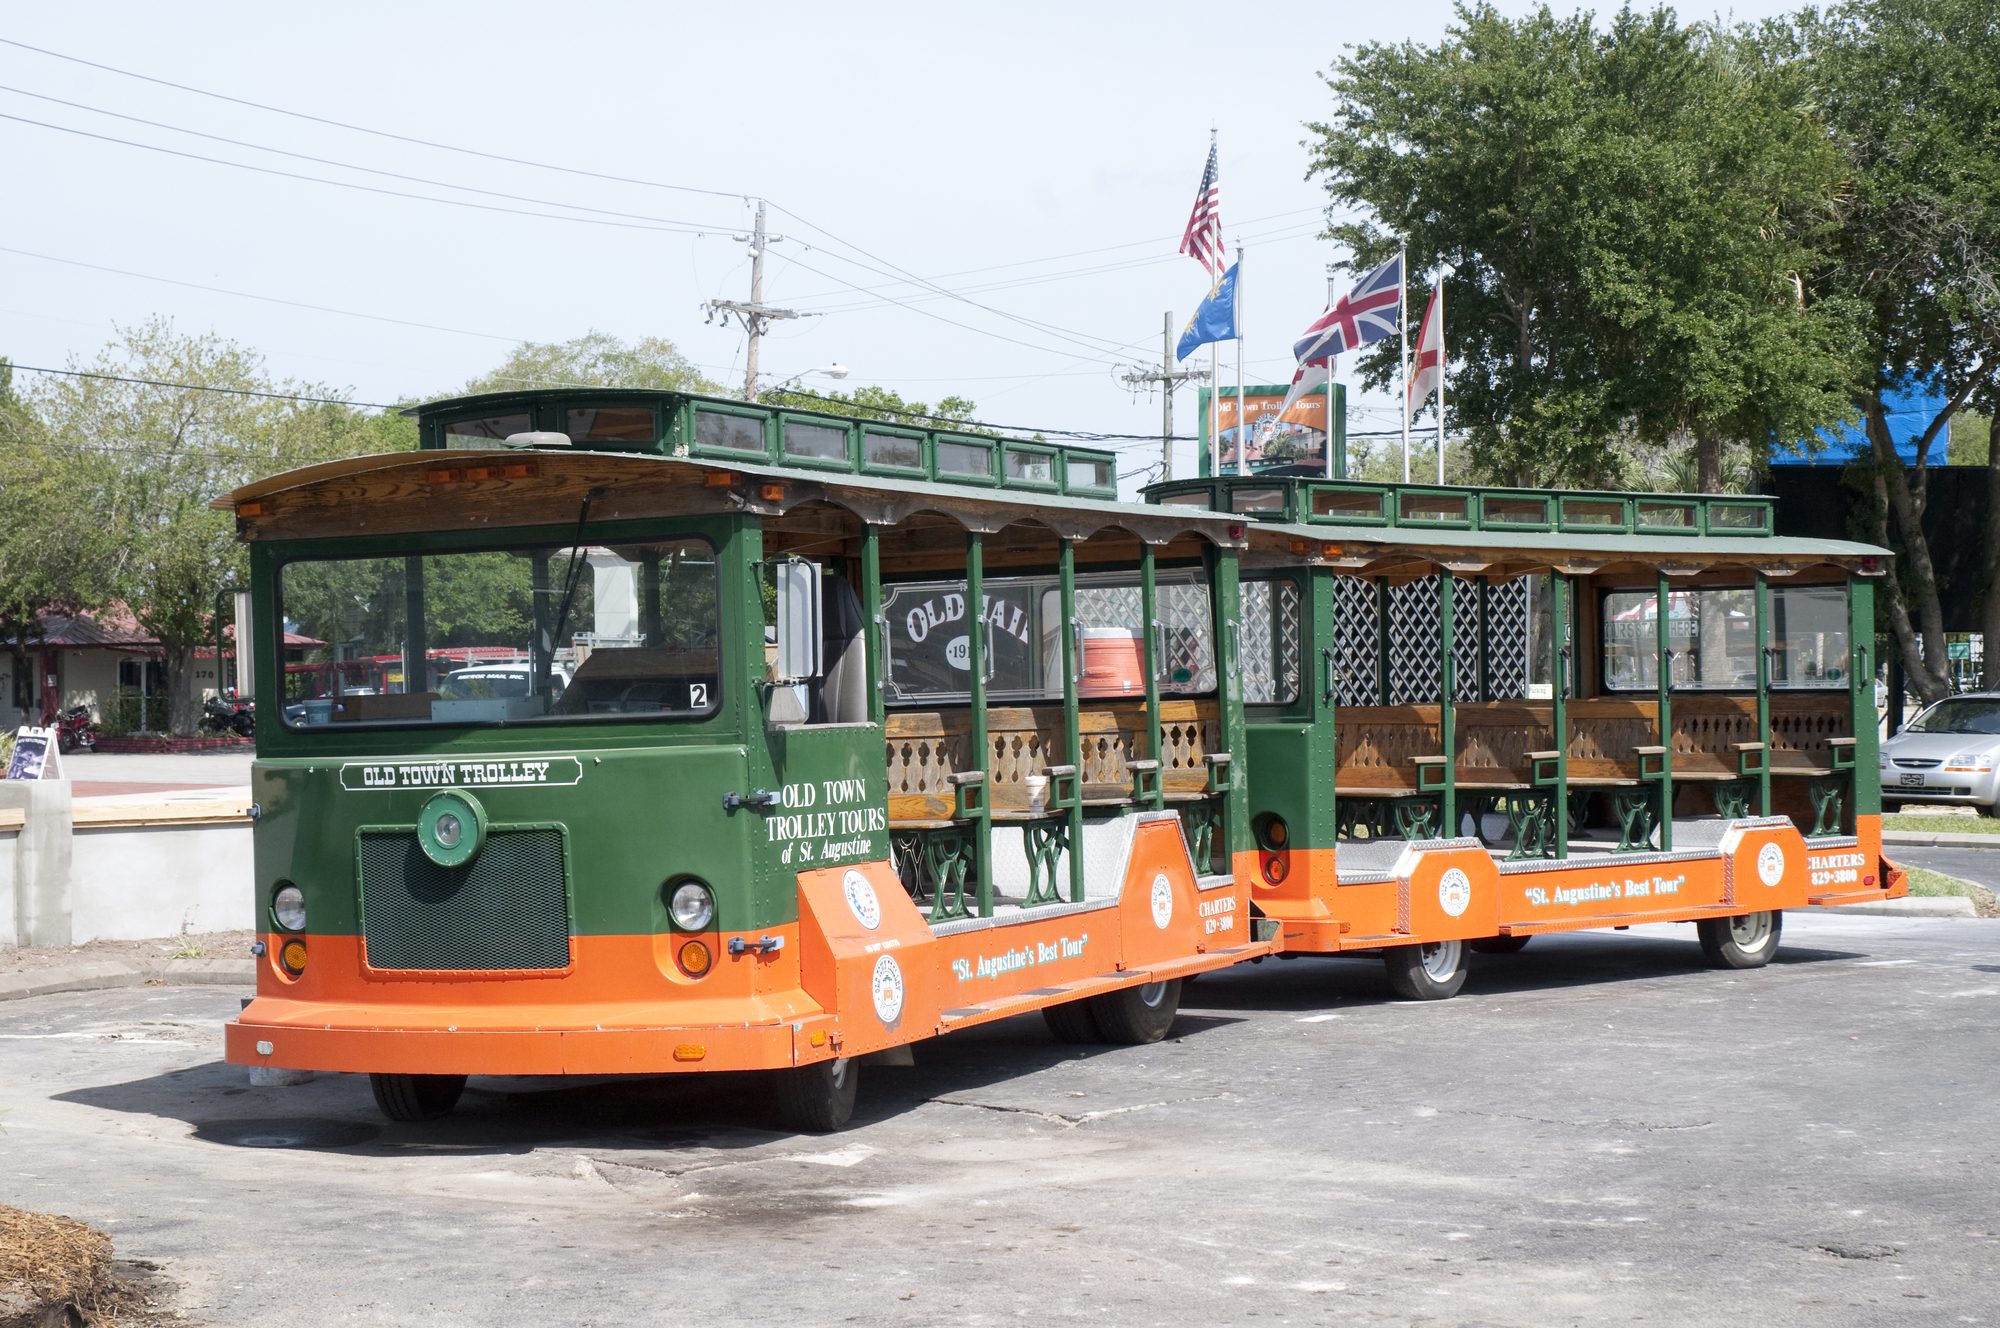 Cap off the rehearsal dinner with a trolley tour around St. Augustine.